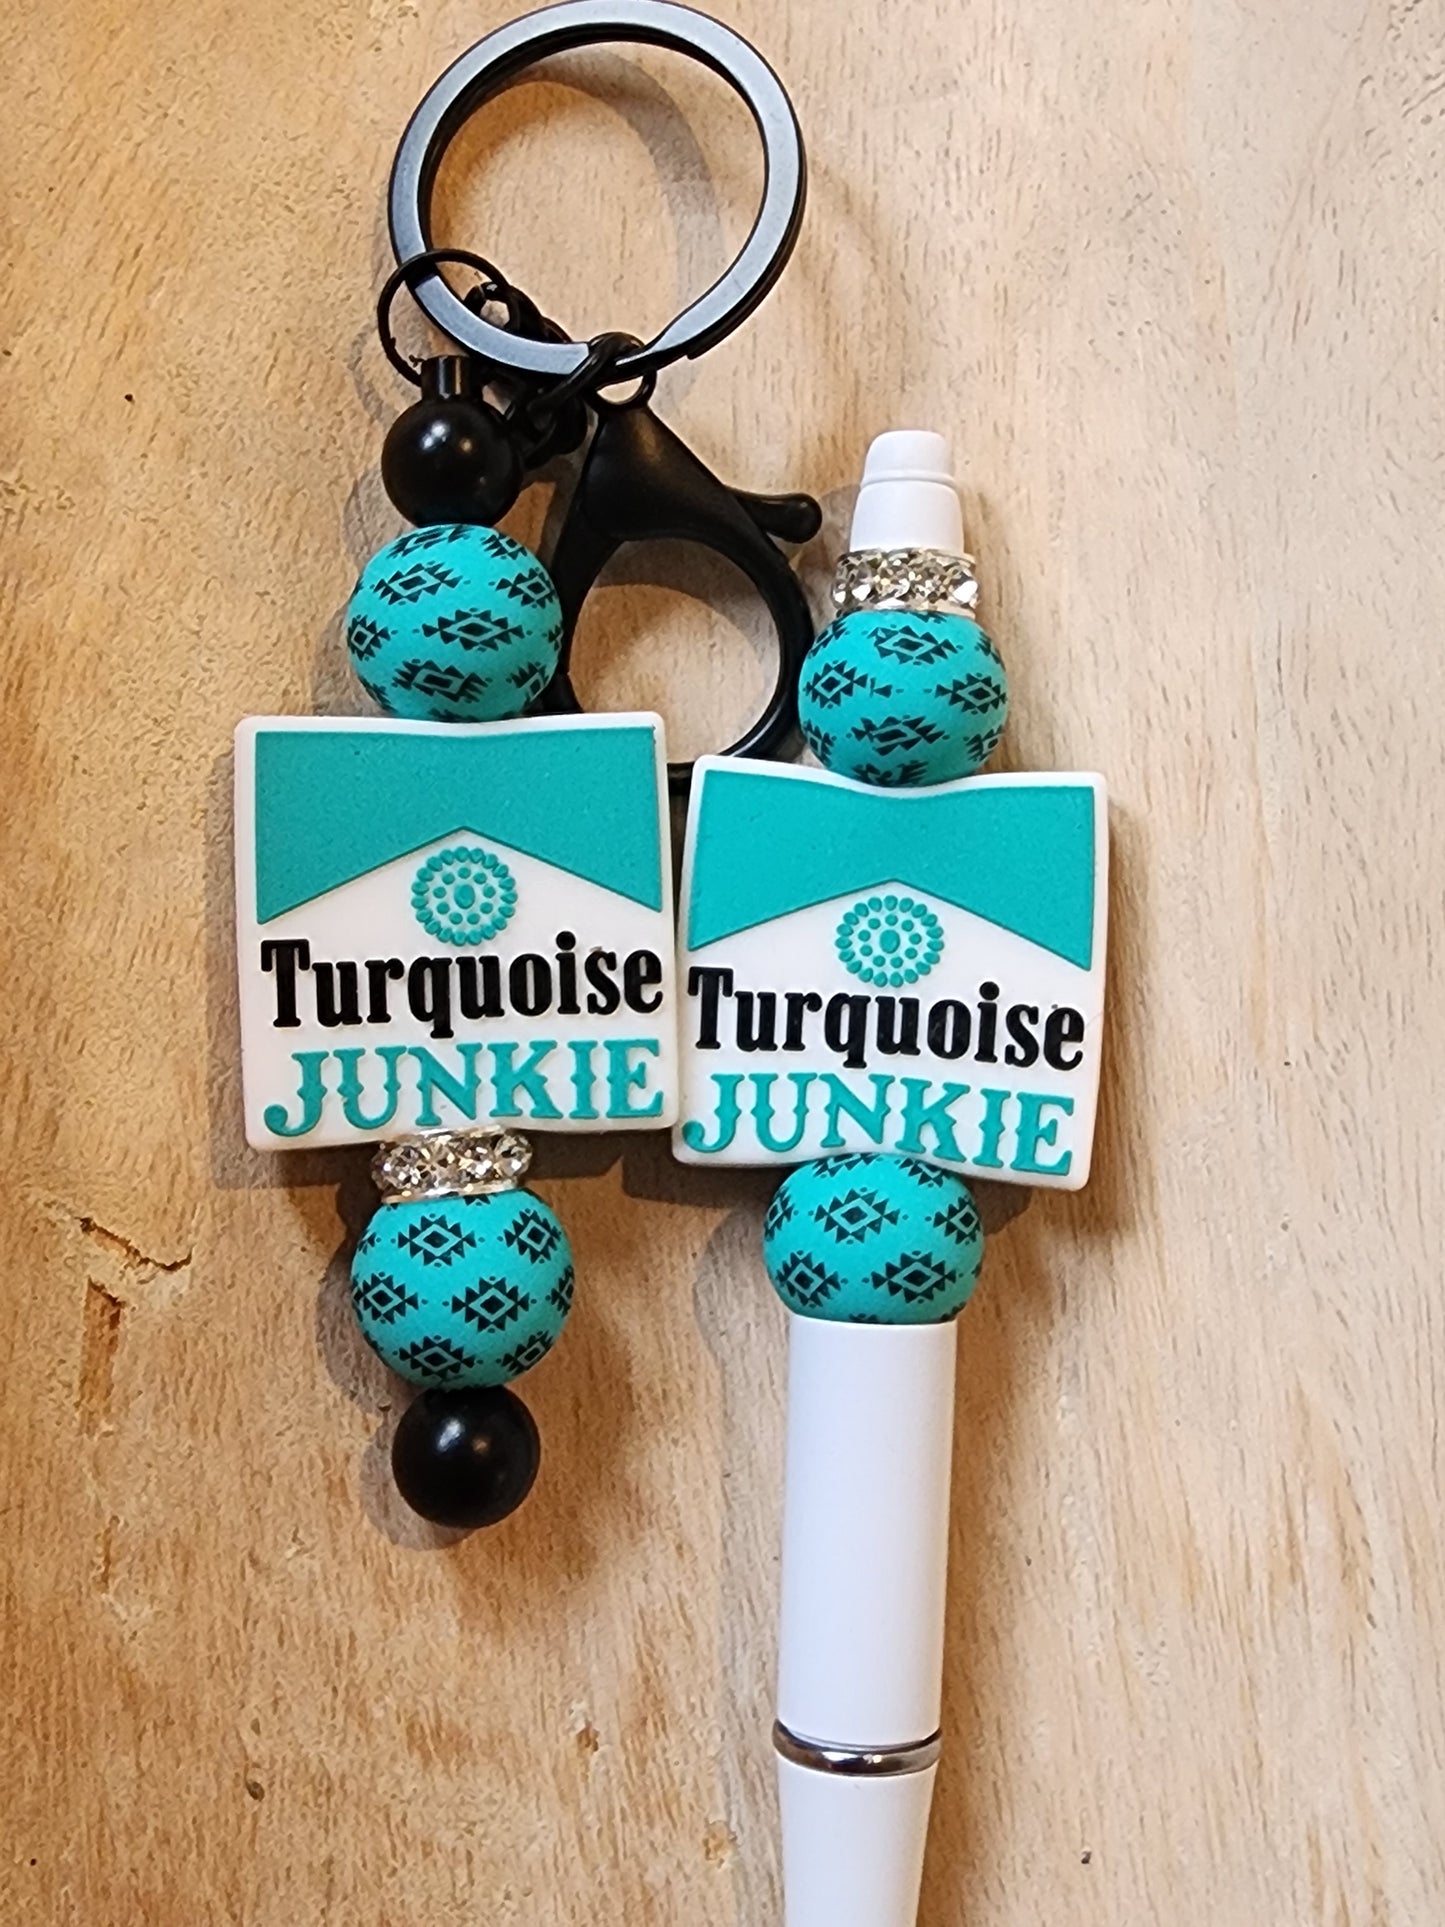 Turquoise junkie silicone beads Keychain pen set